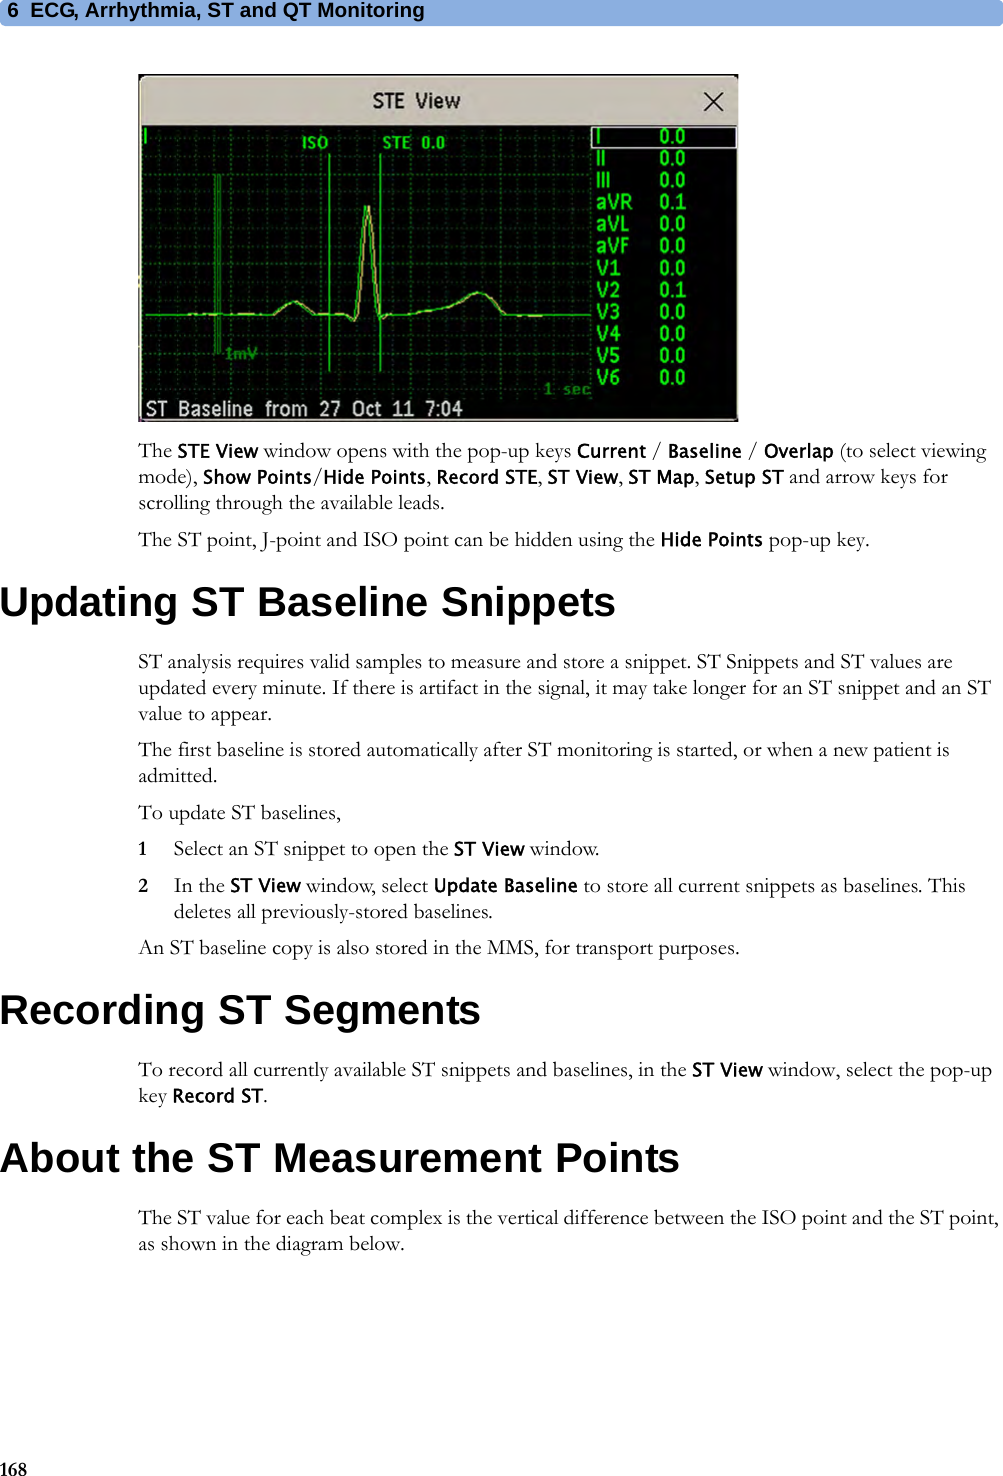 6 ECG, Arrhythmia, ST and QT Monitoring168The STE View window opens with the pop-up keys Current / Baseline / Overlap (to select viewing mode), Show Points/Hide Points, Record STE, ST View, ST Map, Setup ST and arrow keys for scrolling through the available leads.The ST point, J-point and ISO point can be hidden using the Hide Points pop-up key.Updating ST Baseline SnippetsST analysis requires valid samples to measure and store a snippet. ST Snippets and ST values are updated every minute. If there is artifact in the signal, it may take longer for an ST snippet and an ST value to appear.The first baseline is stored automatically after ST monitoring is started, or when a new patient is admitted.To update ST baselines,1Select an ST snippet to open the ST View window.2In the ST View window, select Update Baseline to store all current snippets as baselines. This deletes all previously-stored baselines.An ST baseline copy is also stored in the MMS, for transport purposes.Recording ST SegmentsTo record all currently available ST snippets and baselines, in the ST View window, select the pop-up key Record ST.About the ST Measurement PointsThe ST value for each beat complex is the vertical difference between the ISO point and the ST point, as shown in the diagram below. 